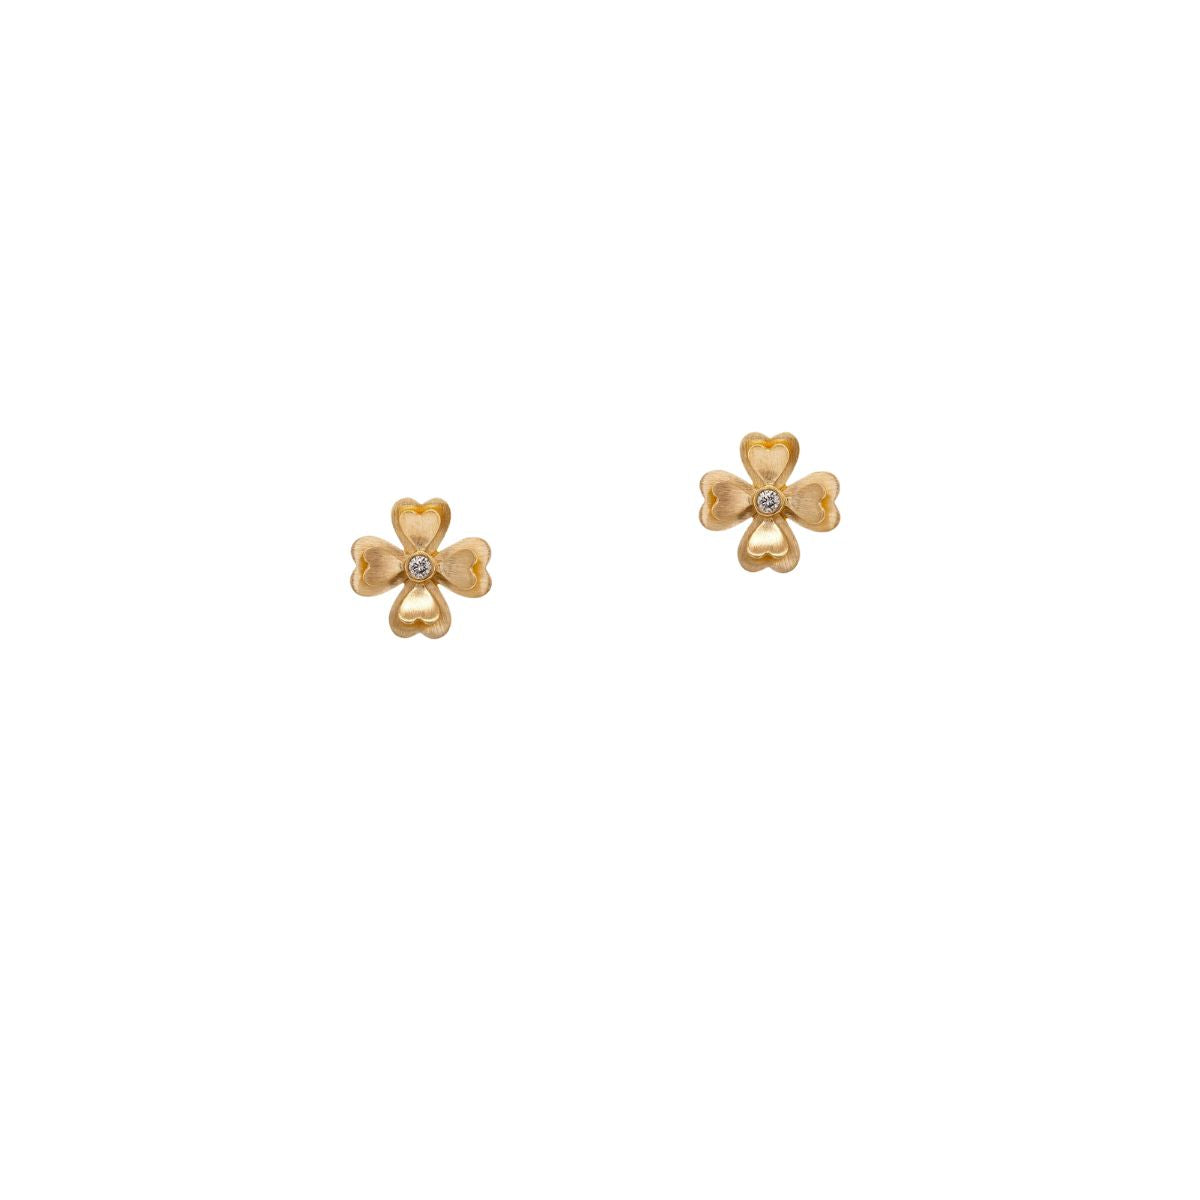 Bridget King Floral Studs in Yellow Gold